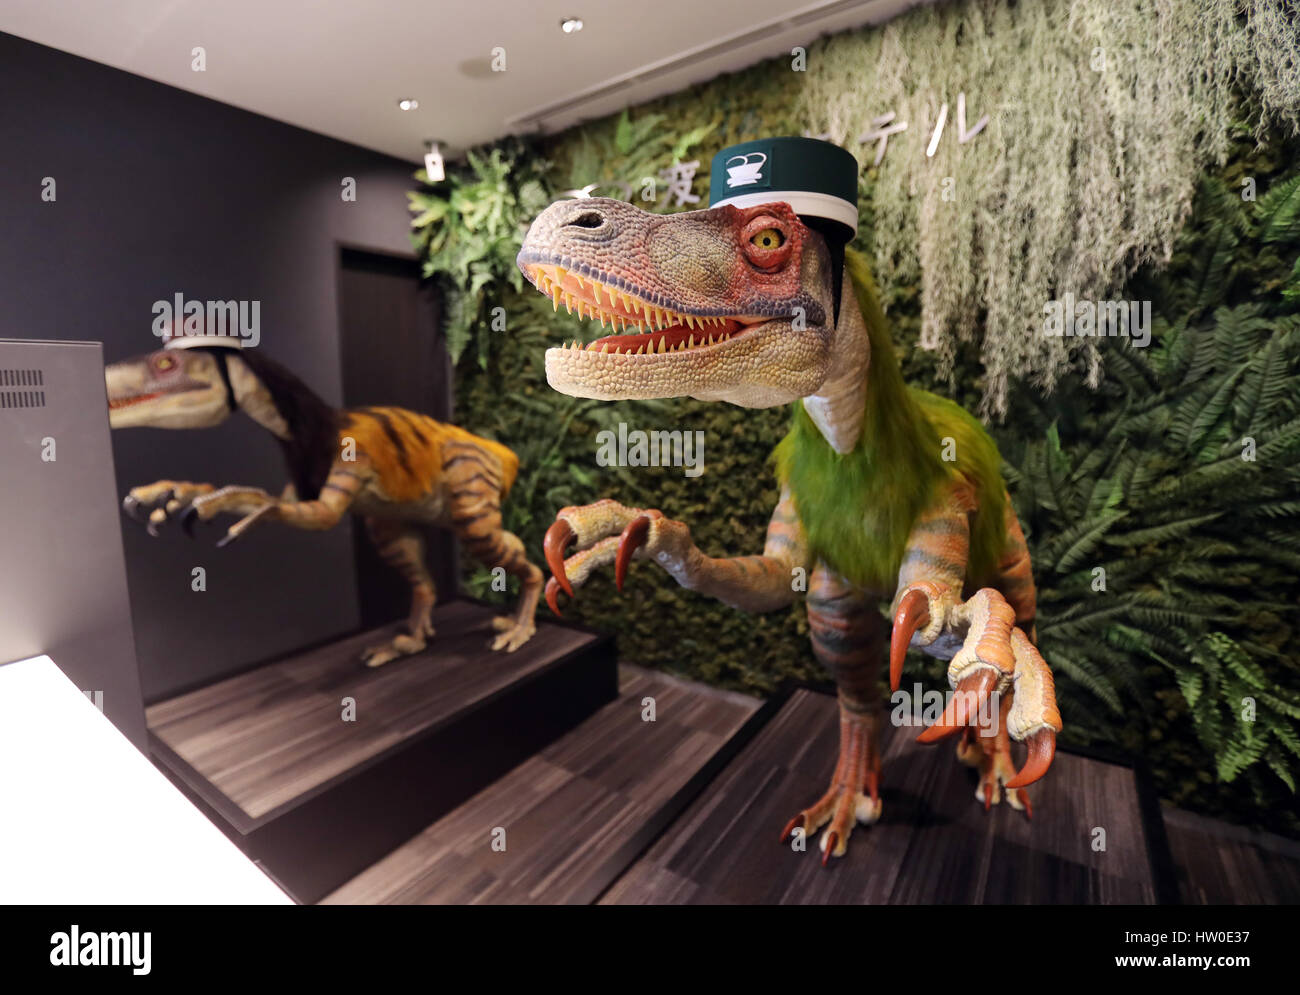 Tokyo, Japan. 15th March 2017. Urayasu, Japan. 15th Mar, 2017. Dinosaur robots greet guests at a reception of the newly opened 'Henn na Hotel' (Strange hotel) near Tokyo Disney Resort in Urayasu, suburban Tokyo on Wednesday, March 15, 2017. Japan's travel agency H.I.S runs the Henn na Hotel which has only seven human employees while nine types 140 robot staffs work at the 100-room six-storey hotel. Credit: Aflo Co. Ltd./Alamy Live News Stock Photo